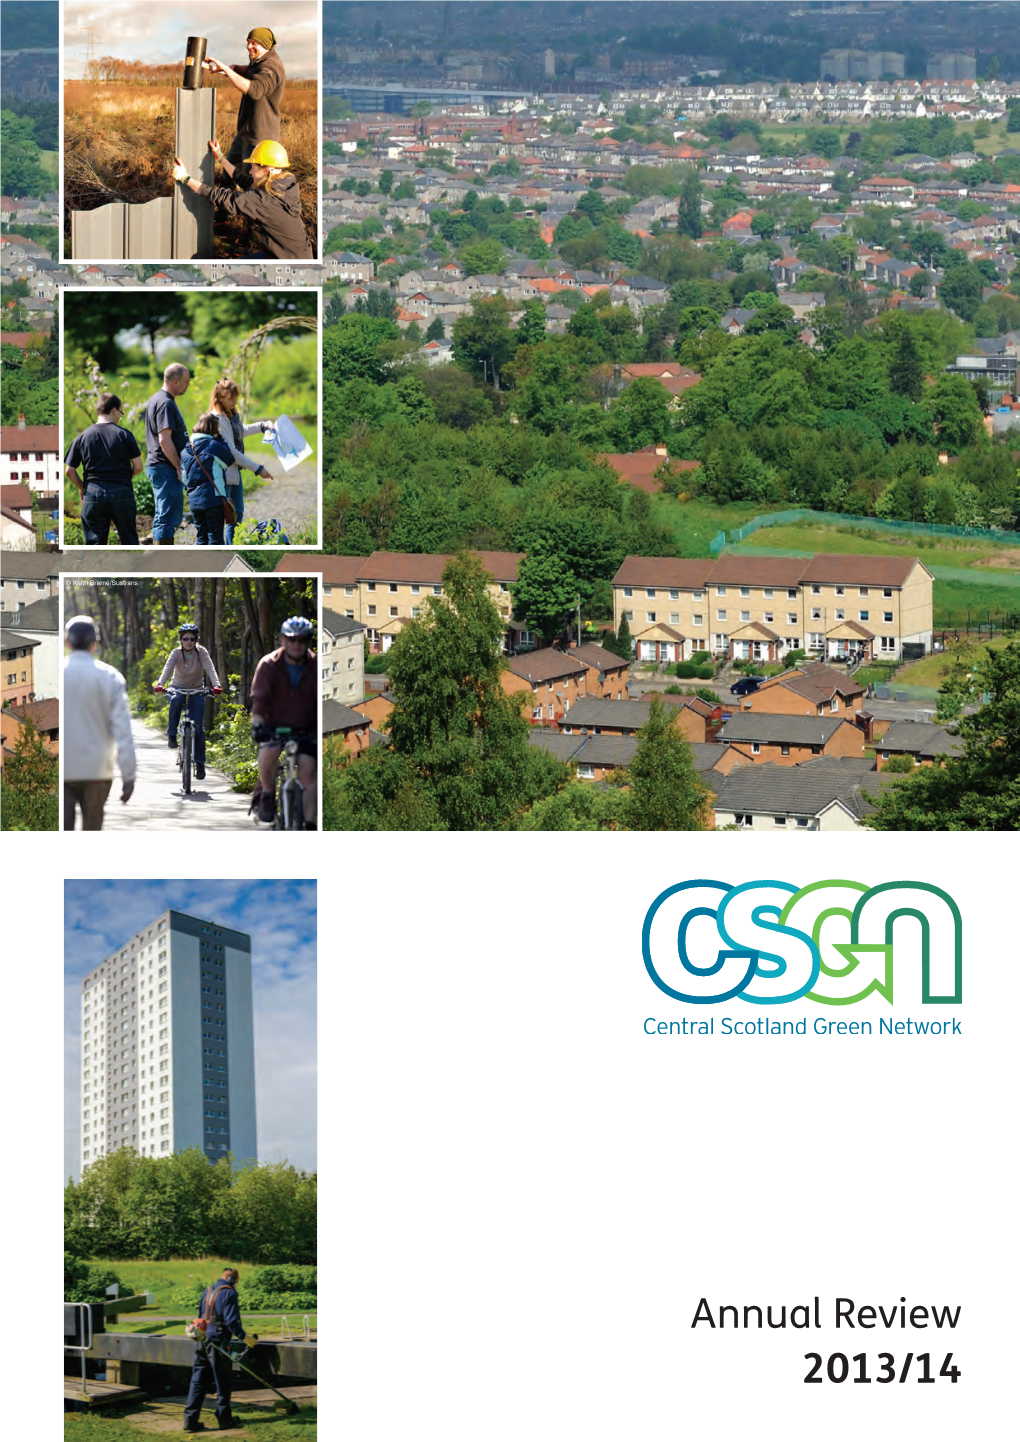 CSGN Annual Review 2013/2014